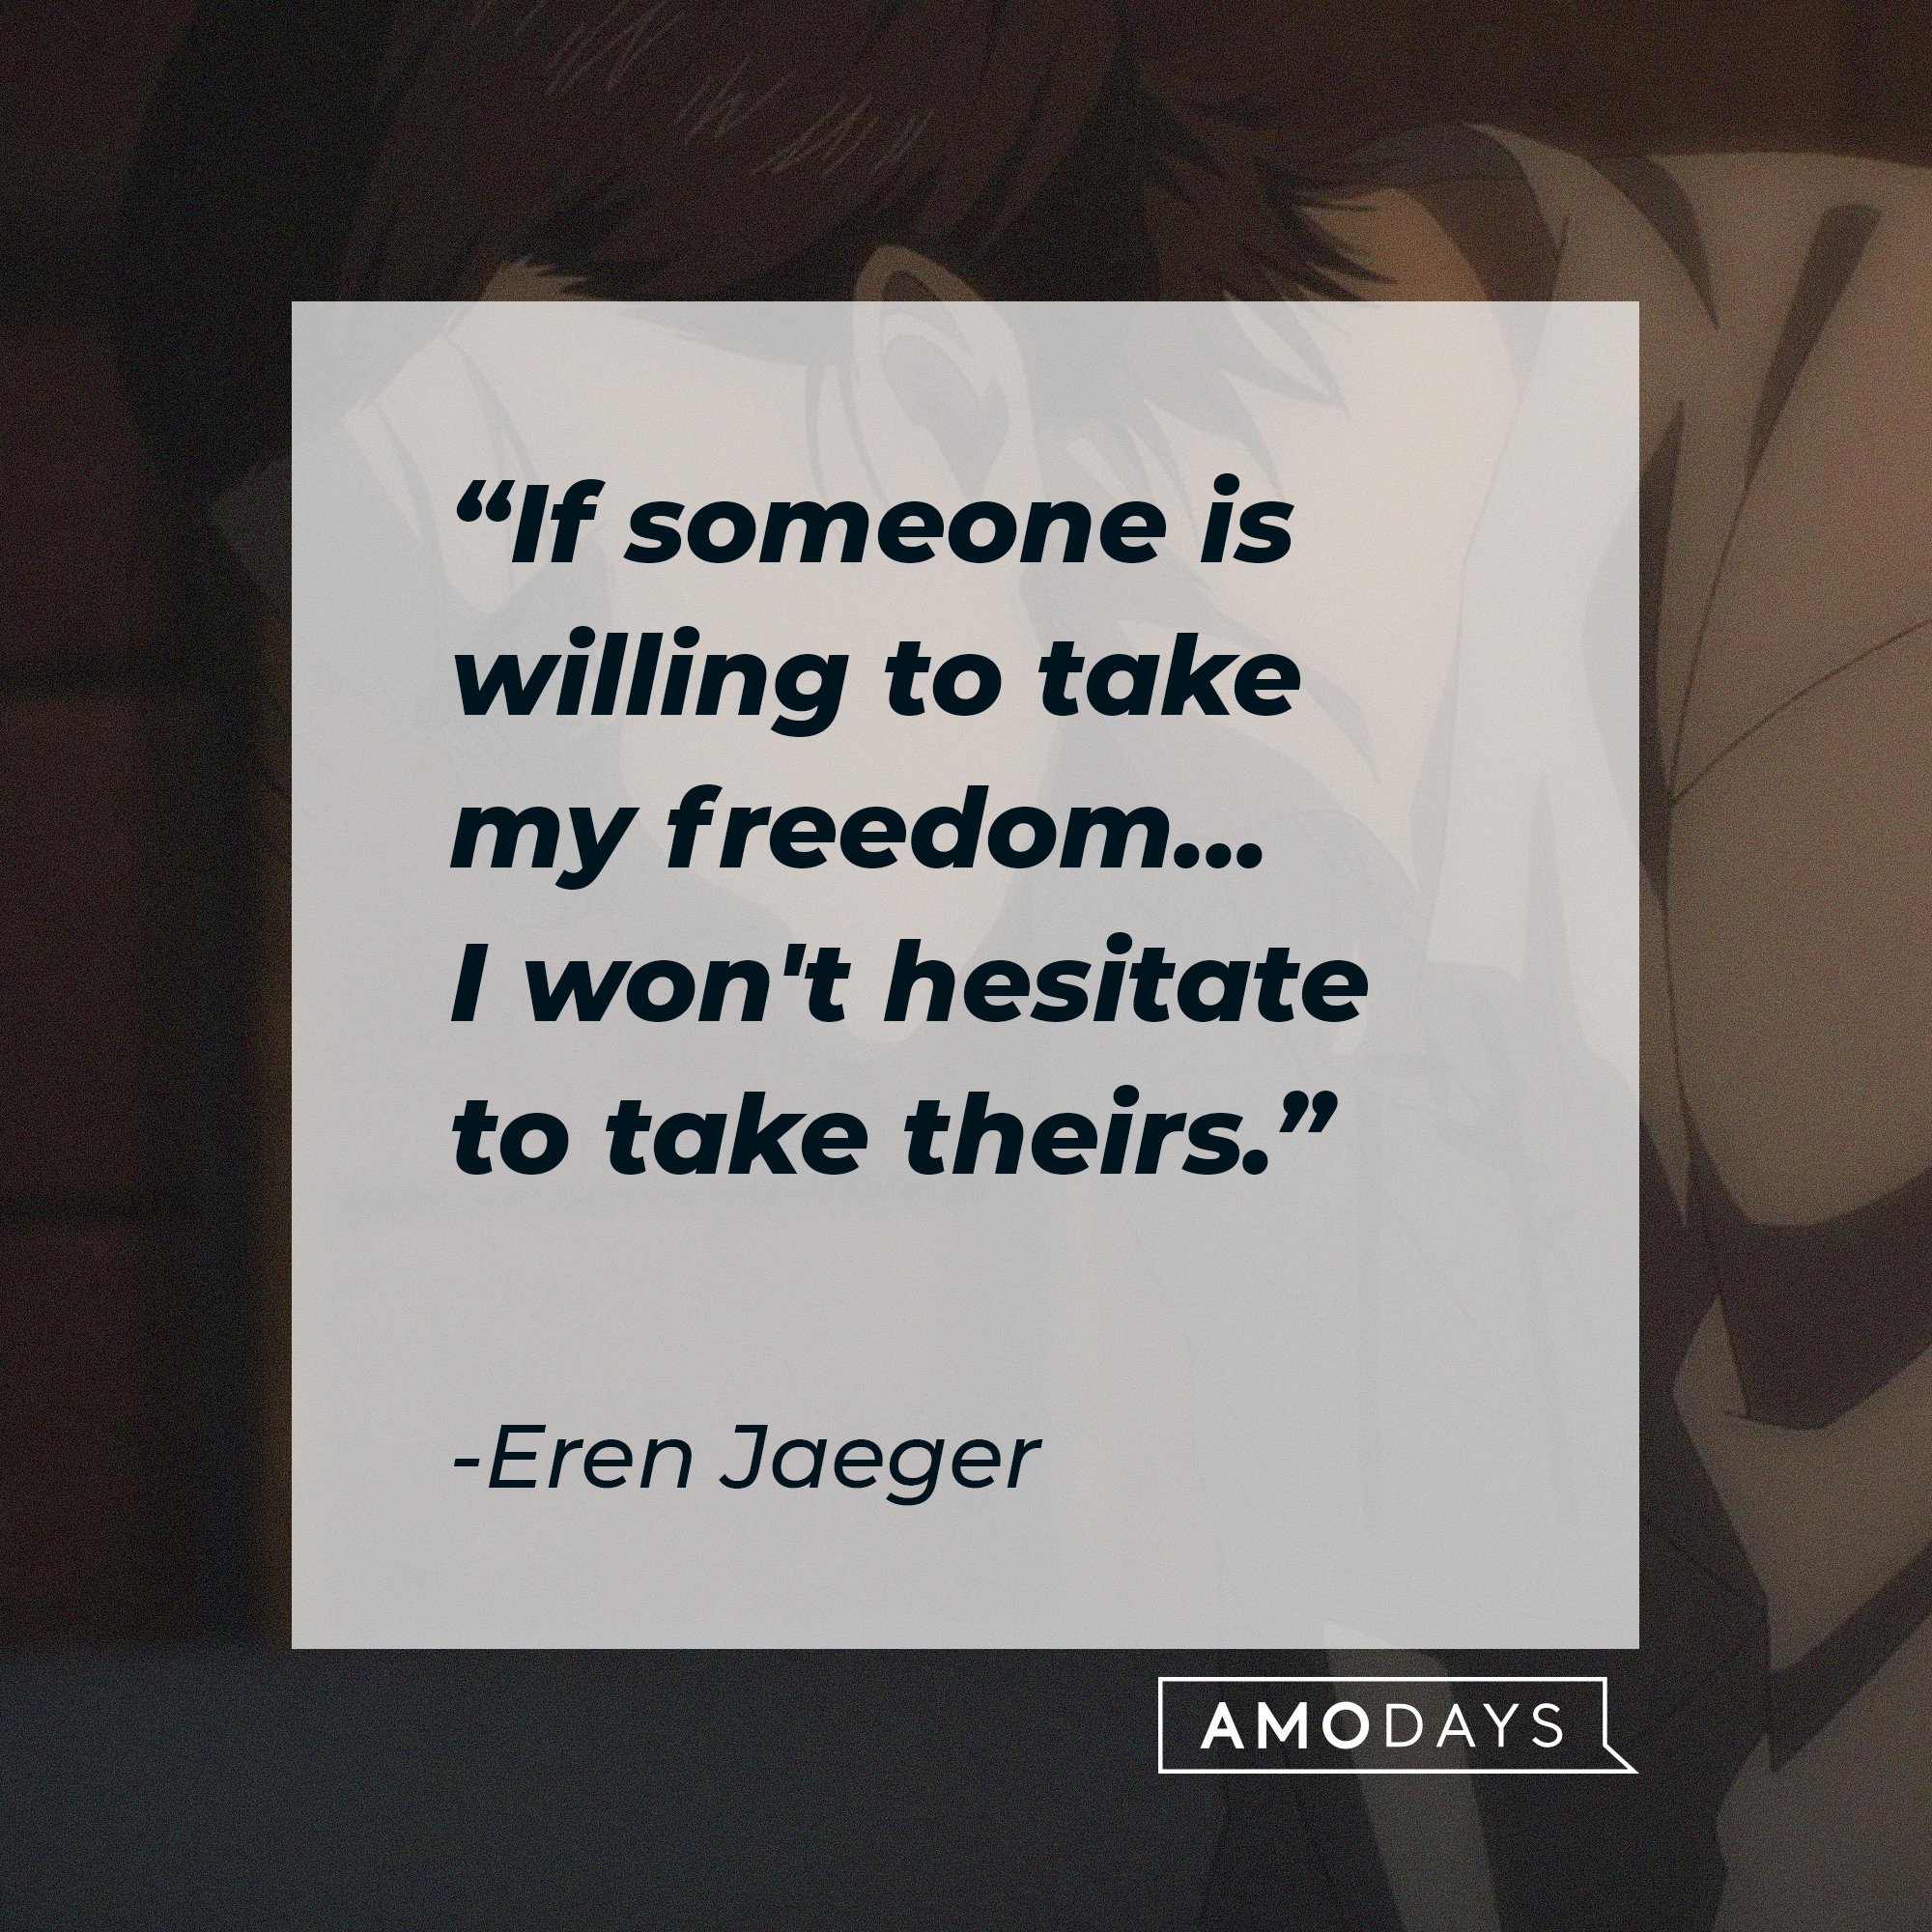 Eren Jaeger’s quote: "If someone tries to steal my freedom away... I won't hesitate to take away theirs." | Image: AmoDays